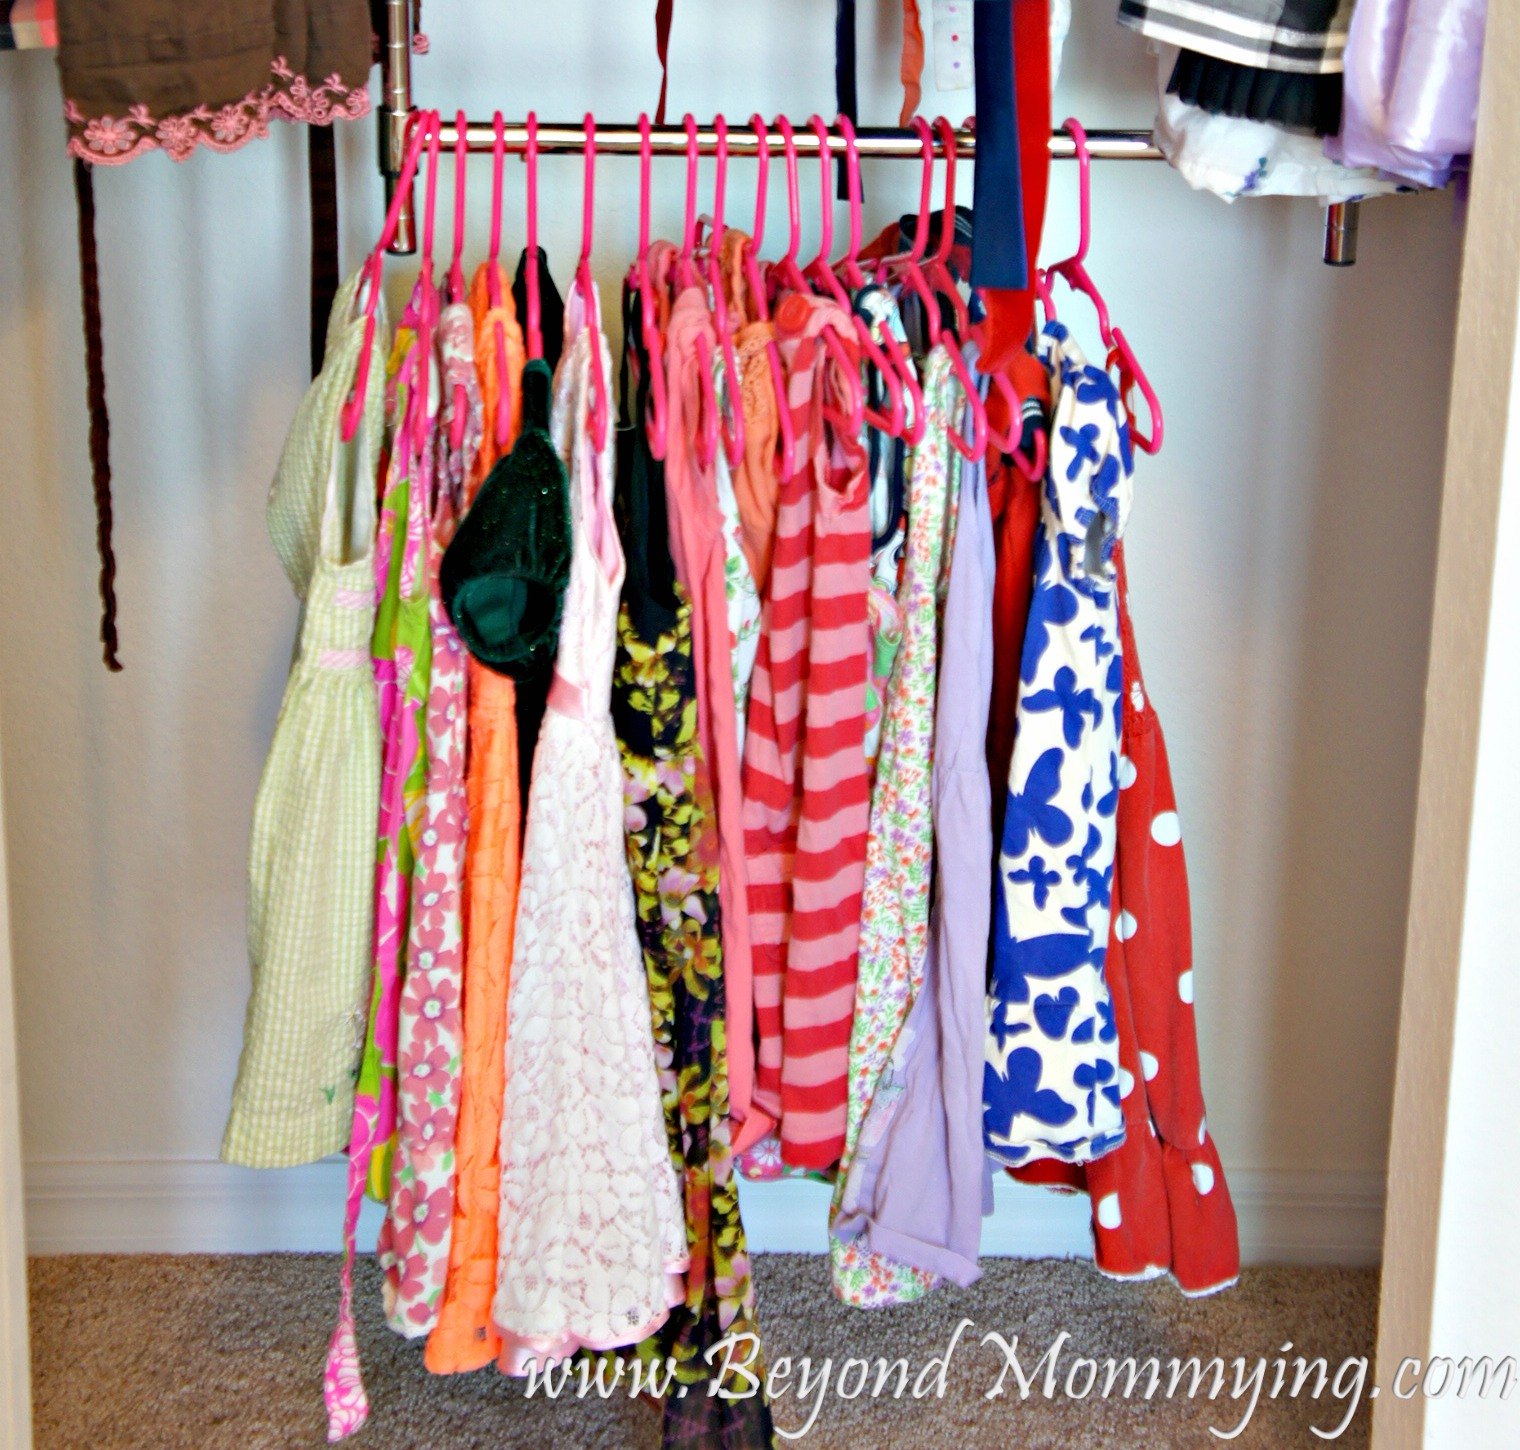 Use a double hanging rod to help kids manages their own hanging clothes